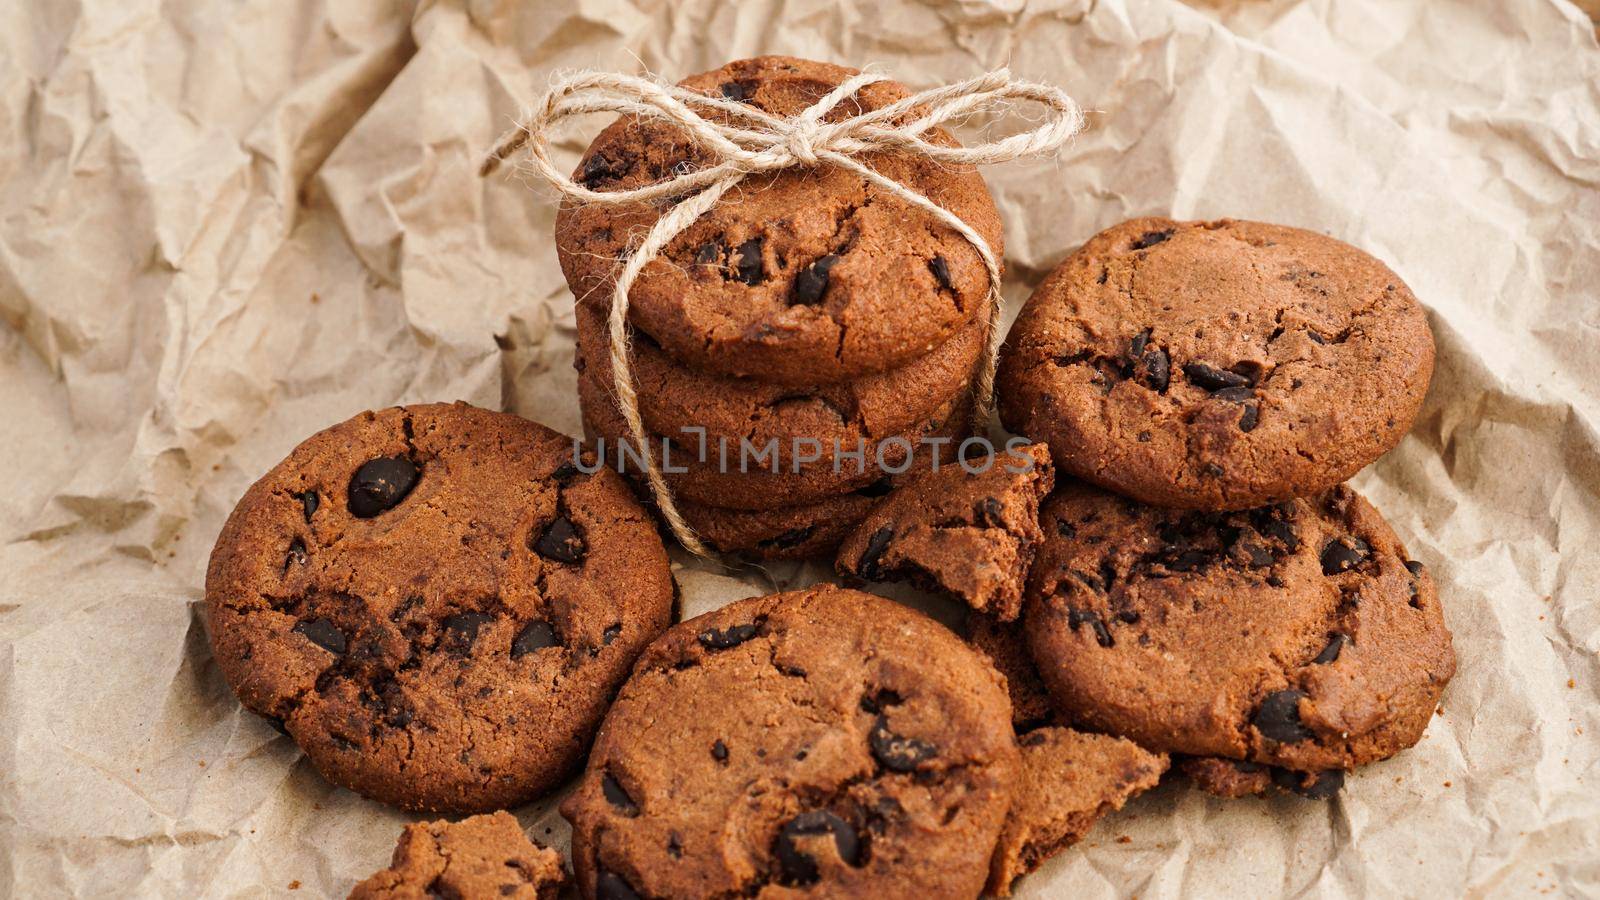 Flatview of handcrafted chocolate cookies with chocolate chips on baking paper. Natural handmade organic snakes for healthy breakfast